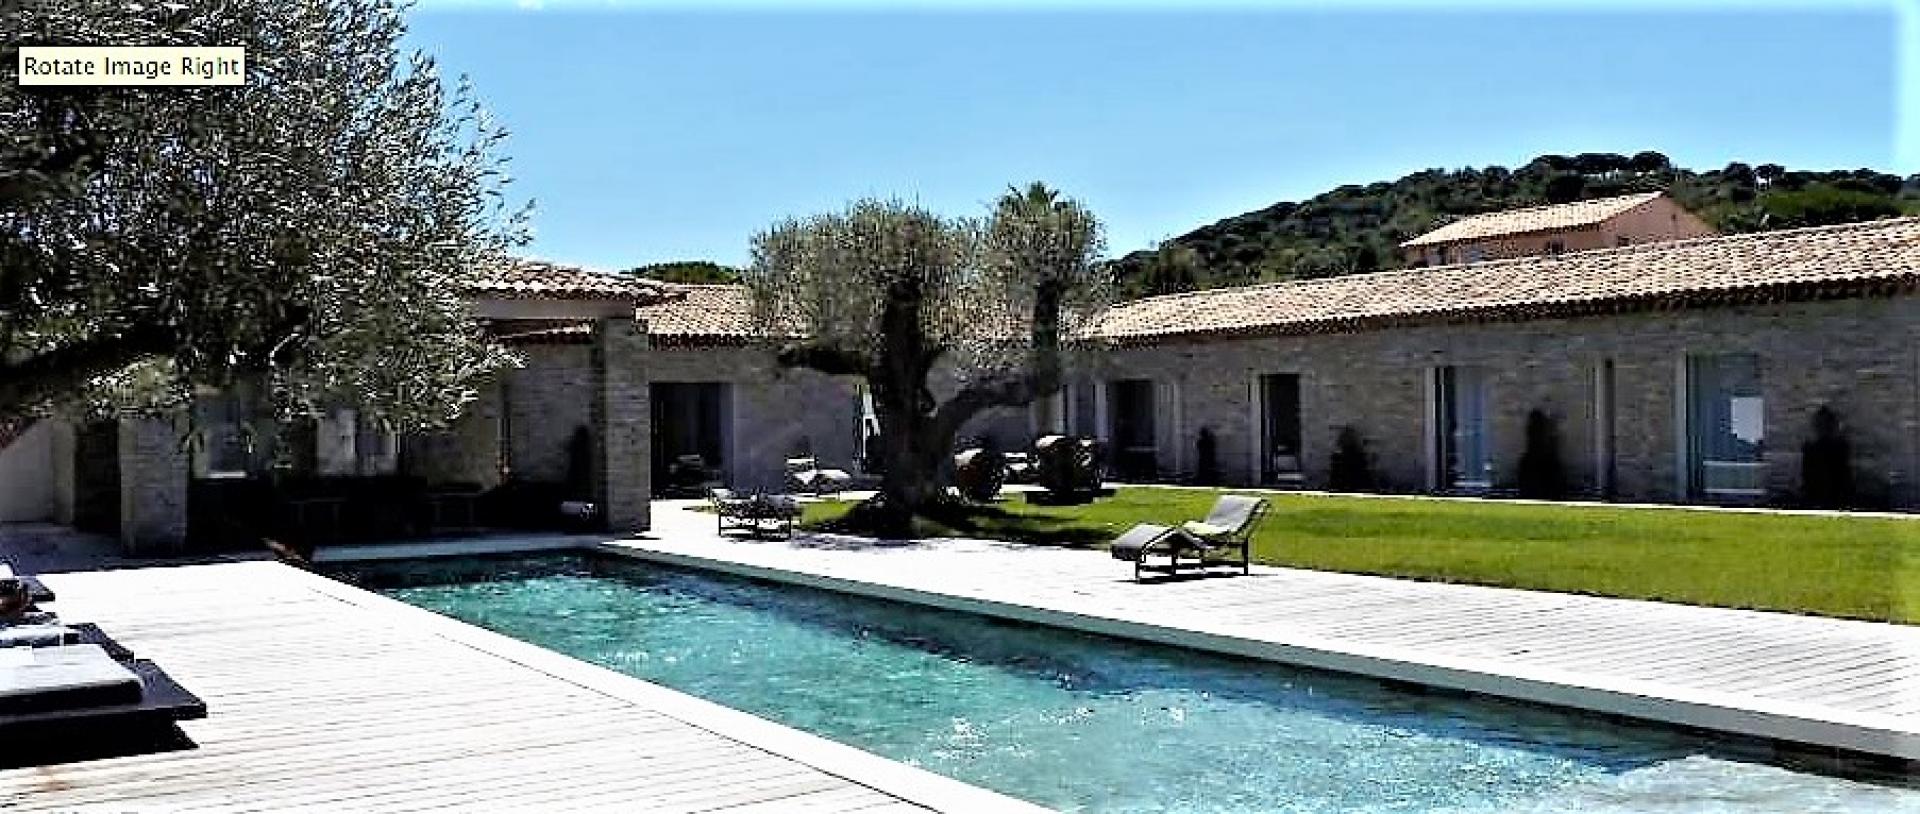 THE MAIN SWIMMING POOL IN A VILLA RENTAL IN THE COTE D'AZEUR